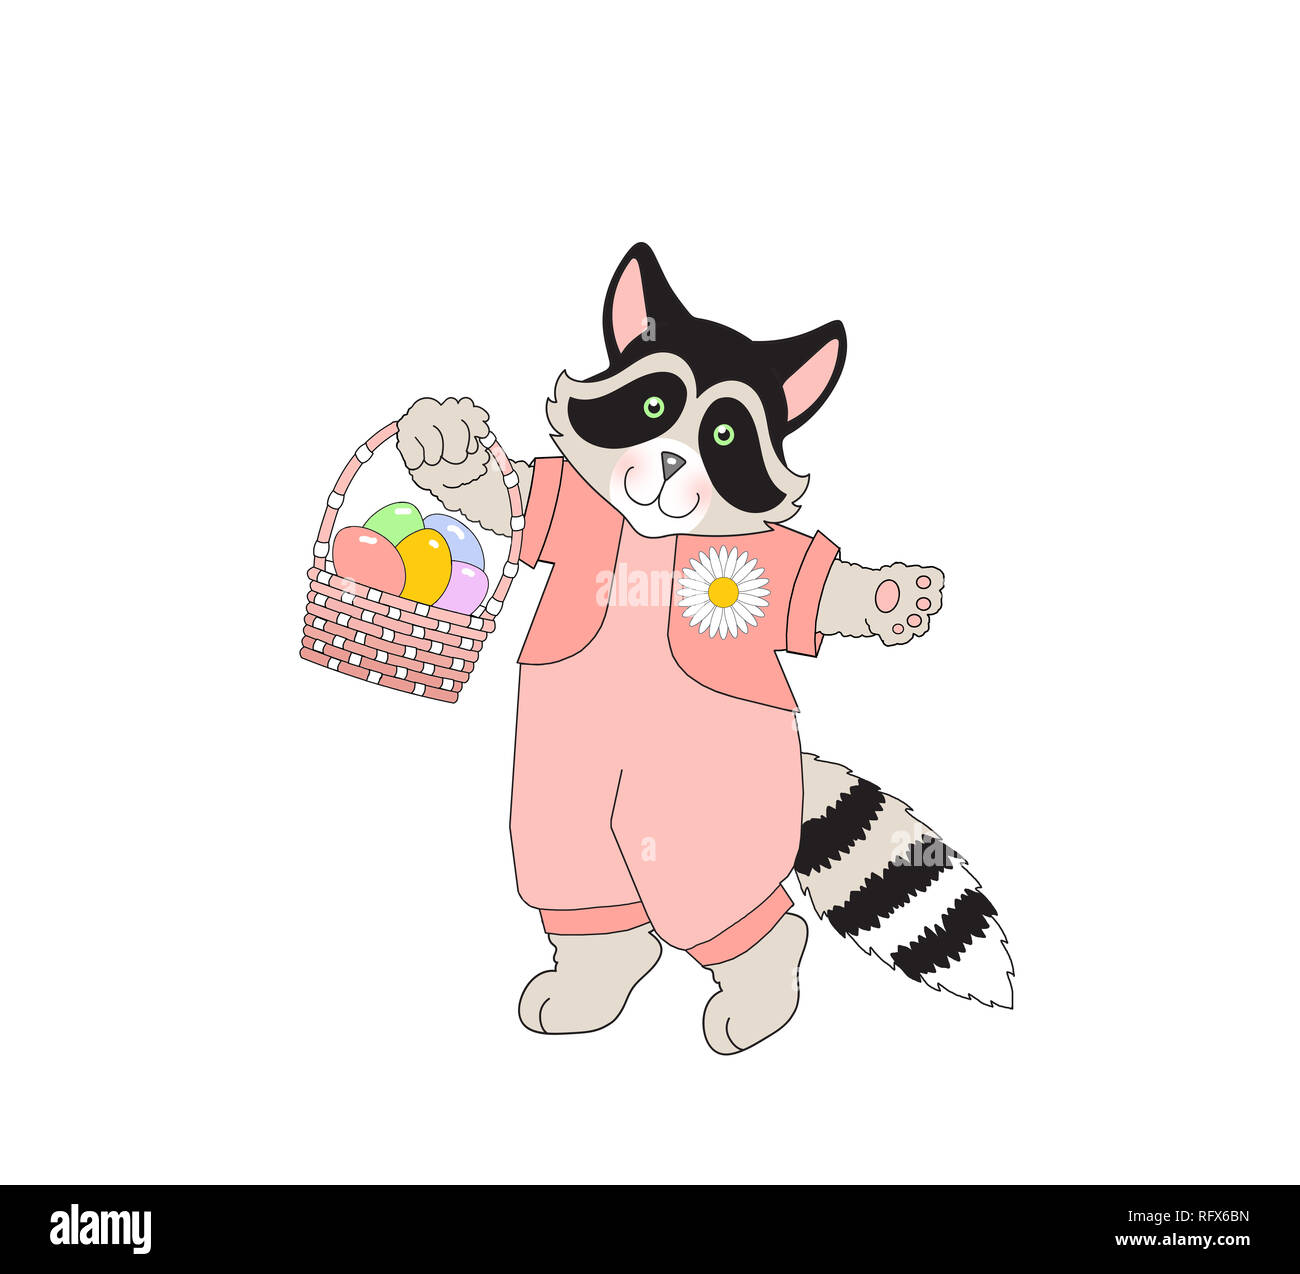 Illustration of a cute raccoon wearing clothes and carrying an Easter basket on a white background Stock Photo